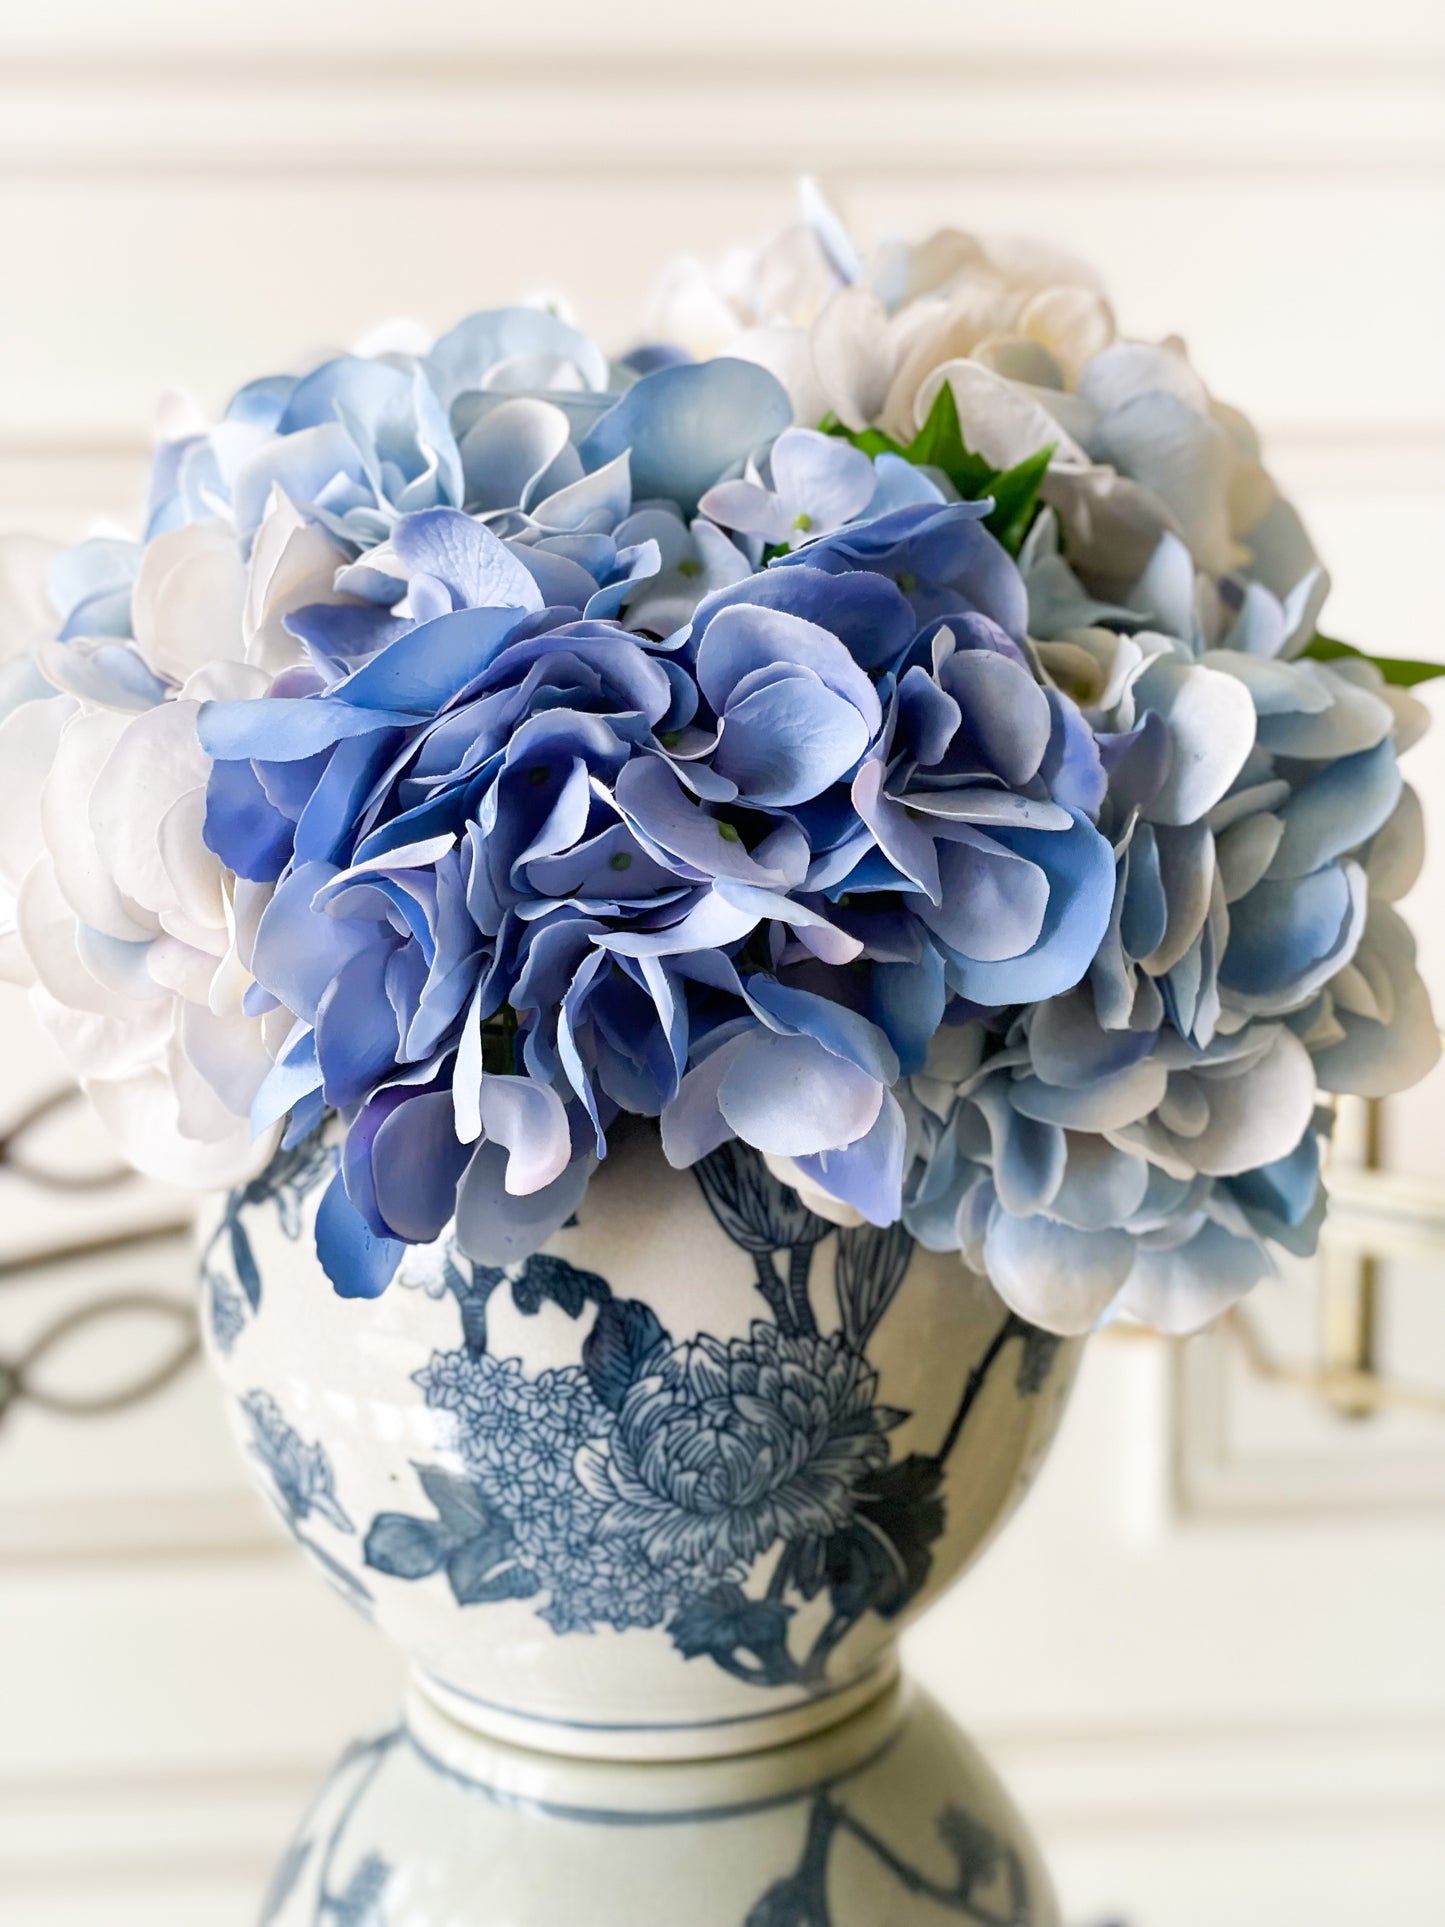 Japanese Blossom Blue And White Vase (Local Pickup Only)